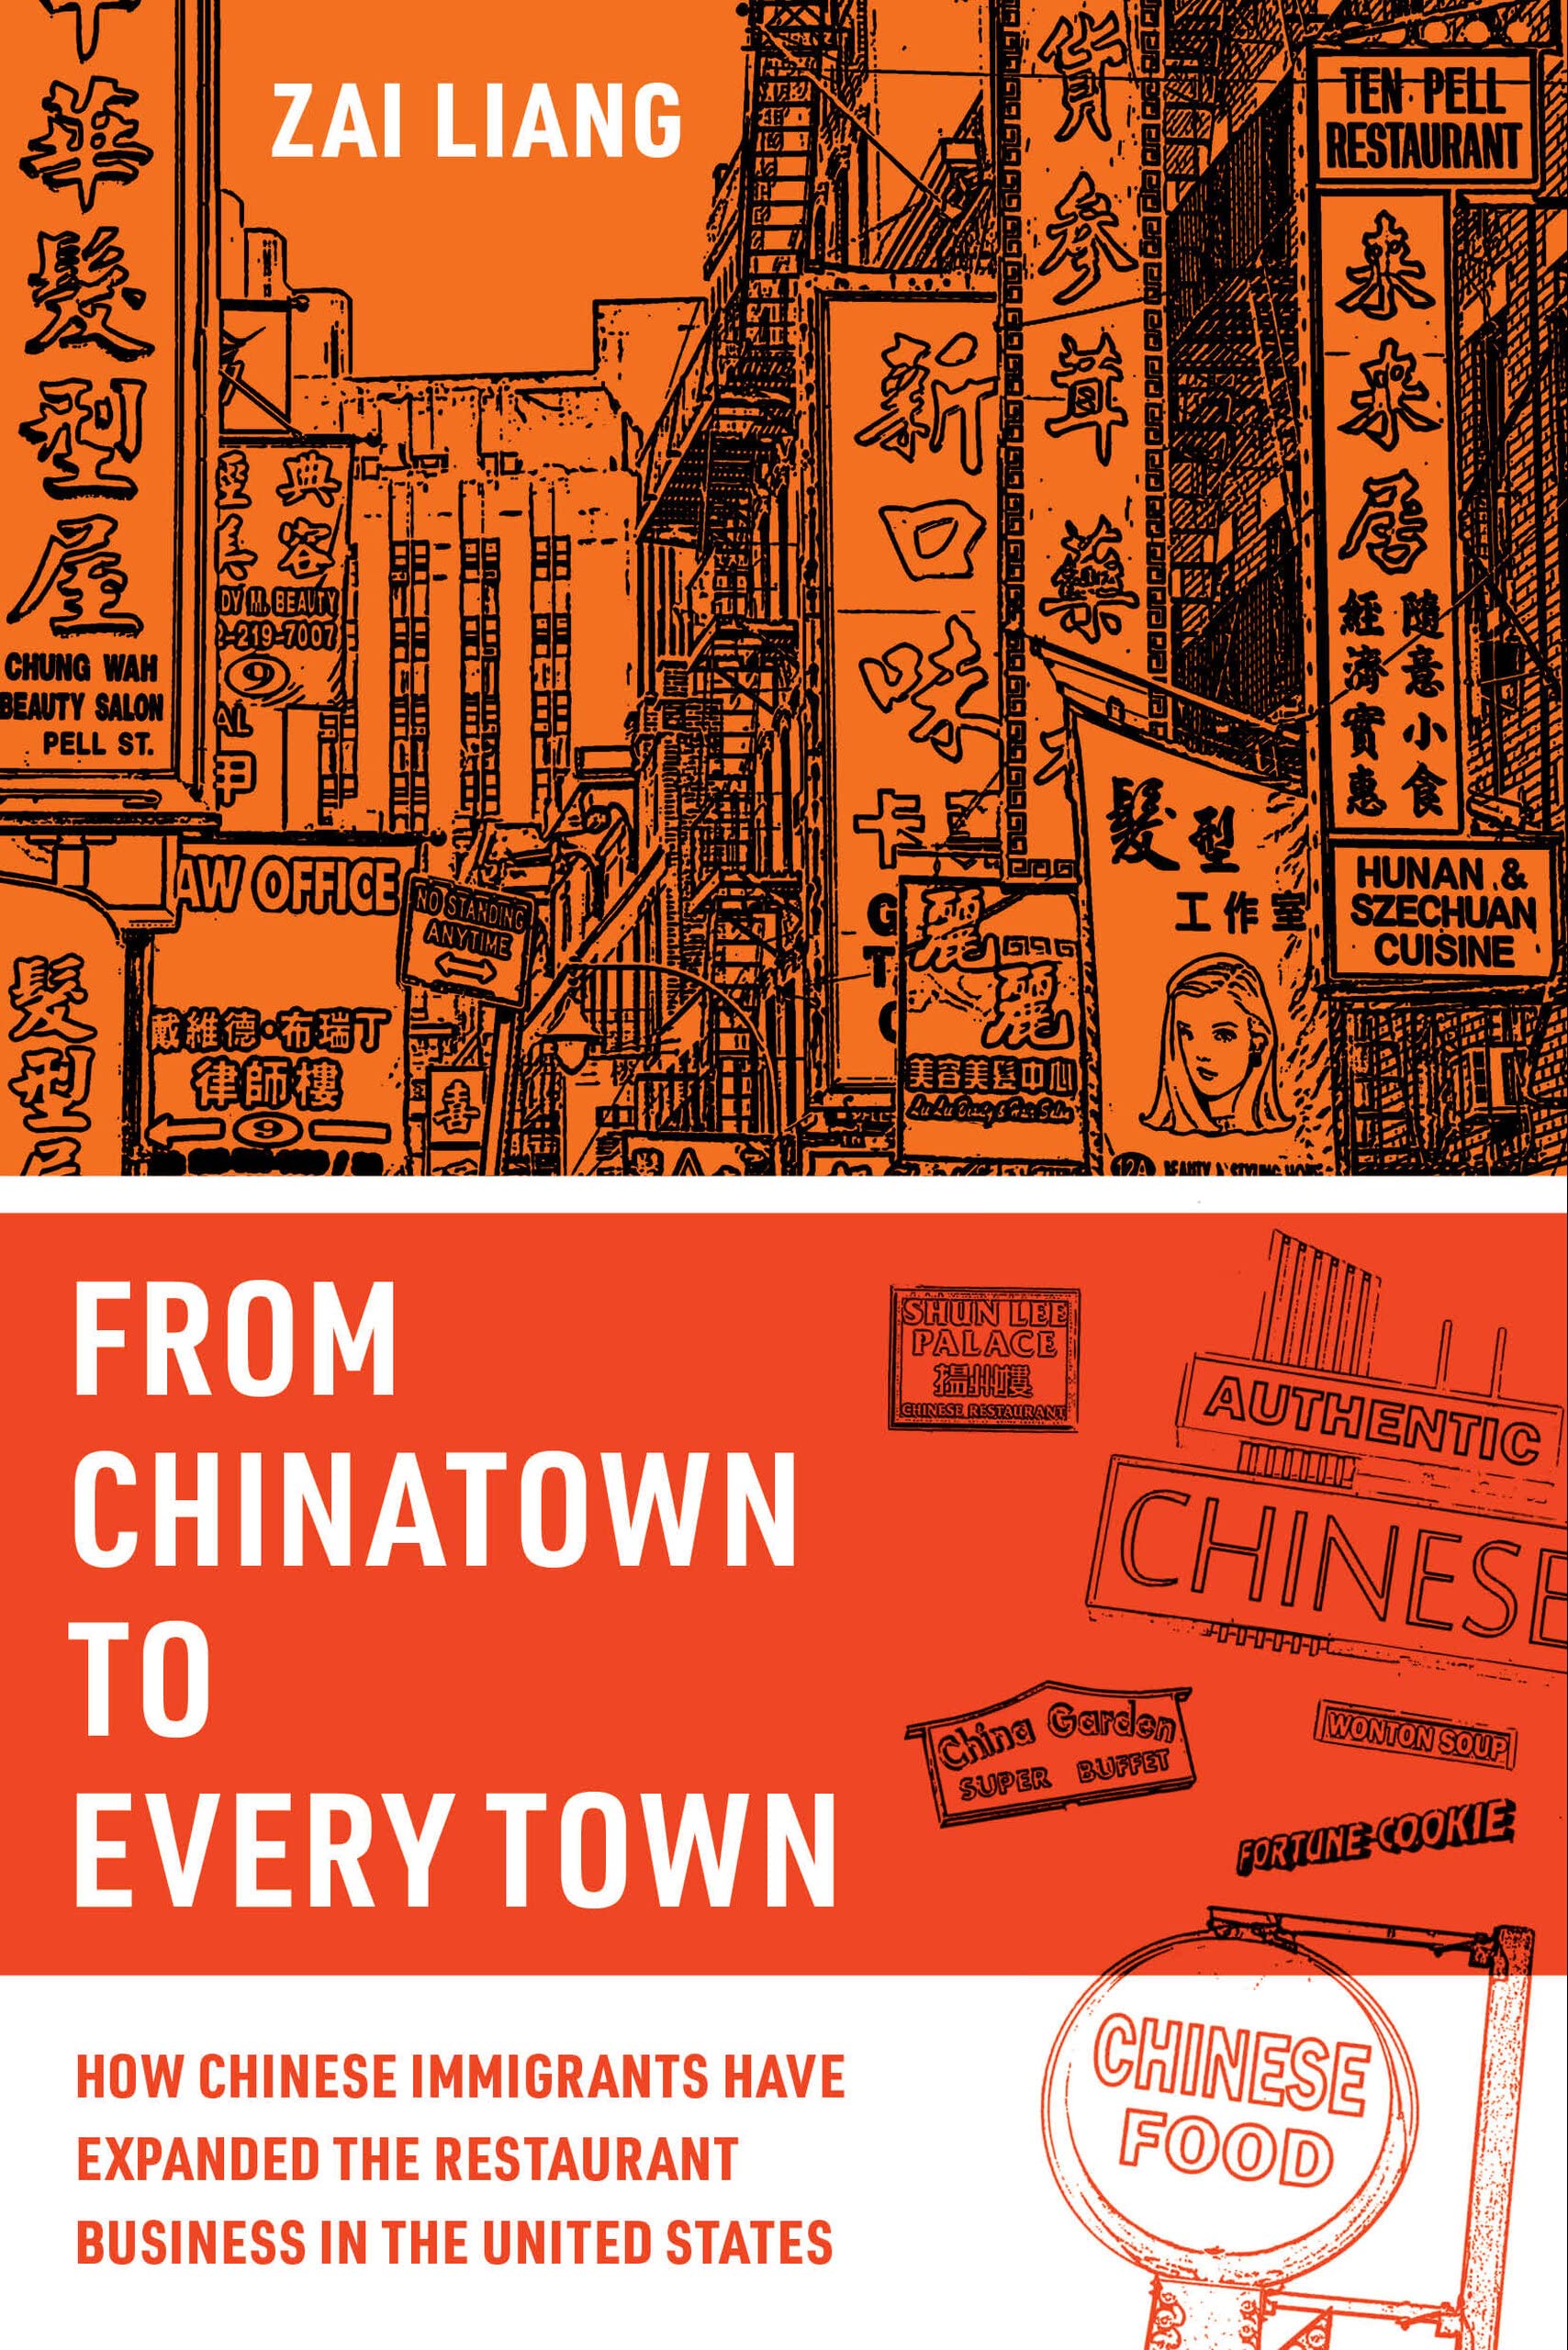 From Chinatown to Every Town: How Chinese Immigrants Have Expanded the Restaurant Business in the United States (Zai Liang)